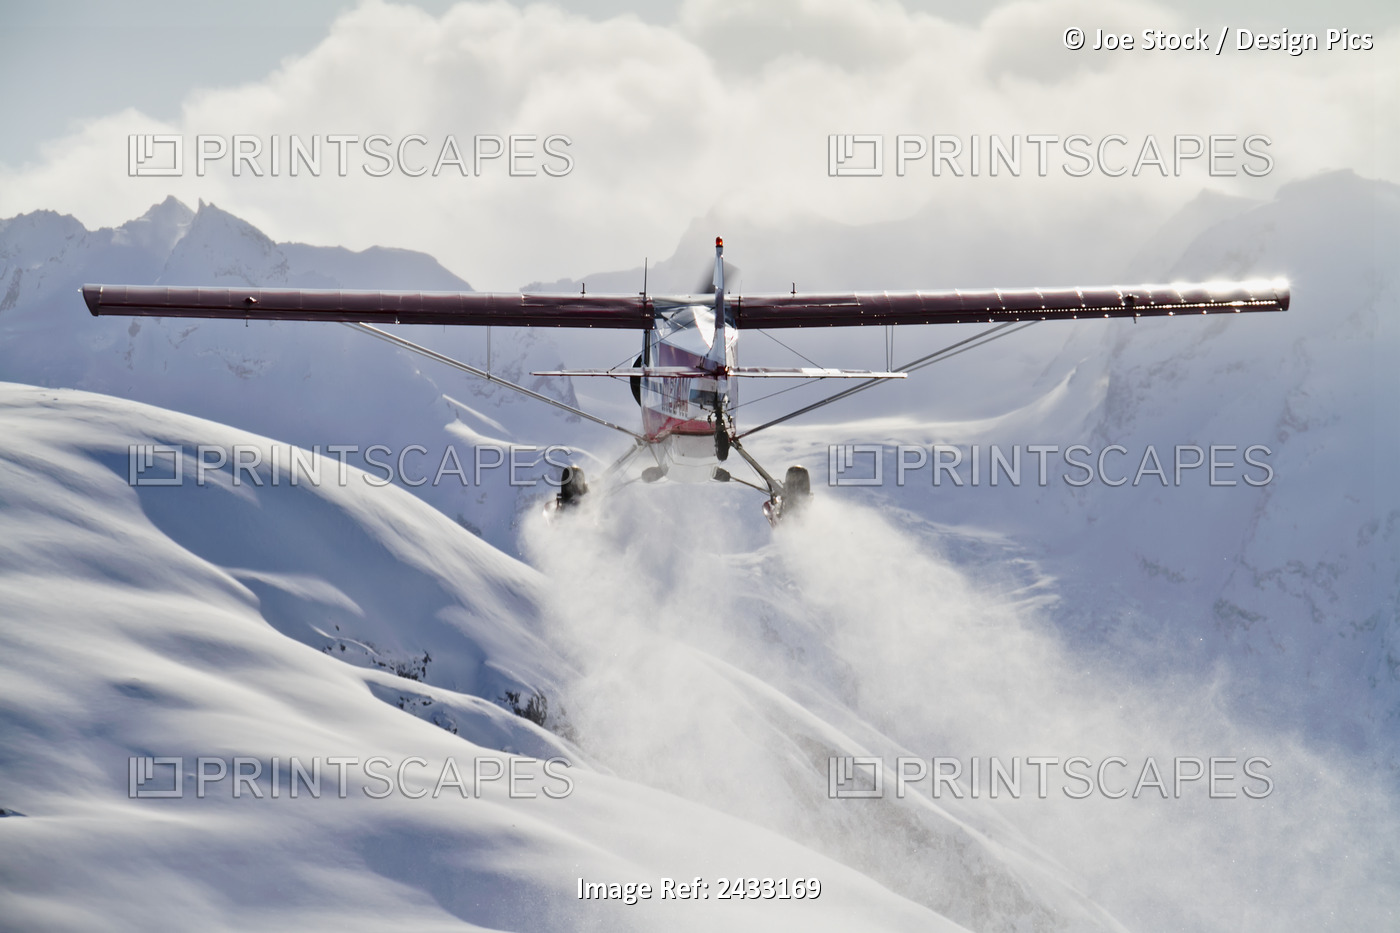 View Of A Super Cub Air Taxi At Tanaina Glacier In The Neacola Mountains, ...